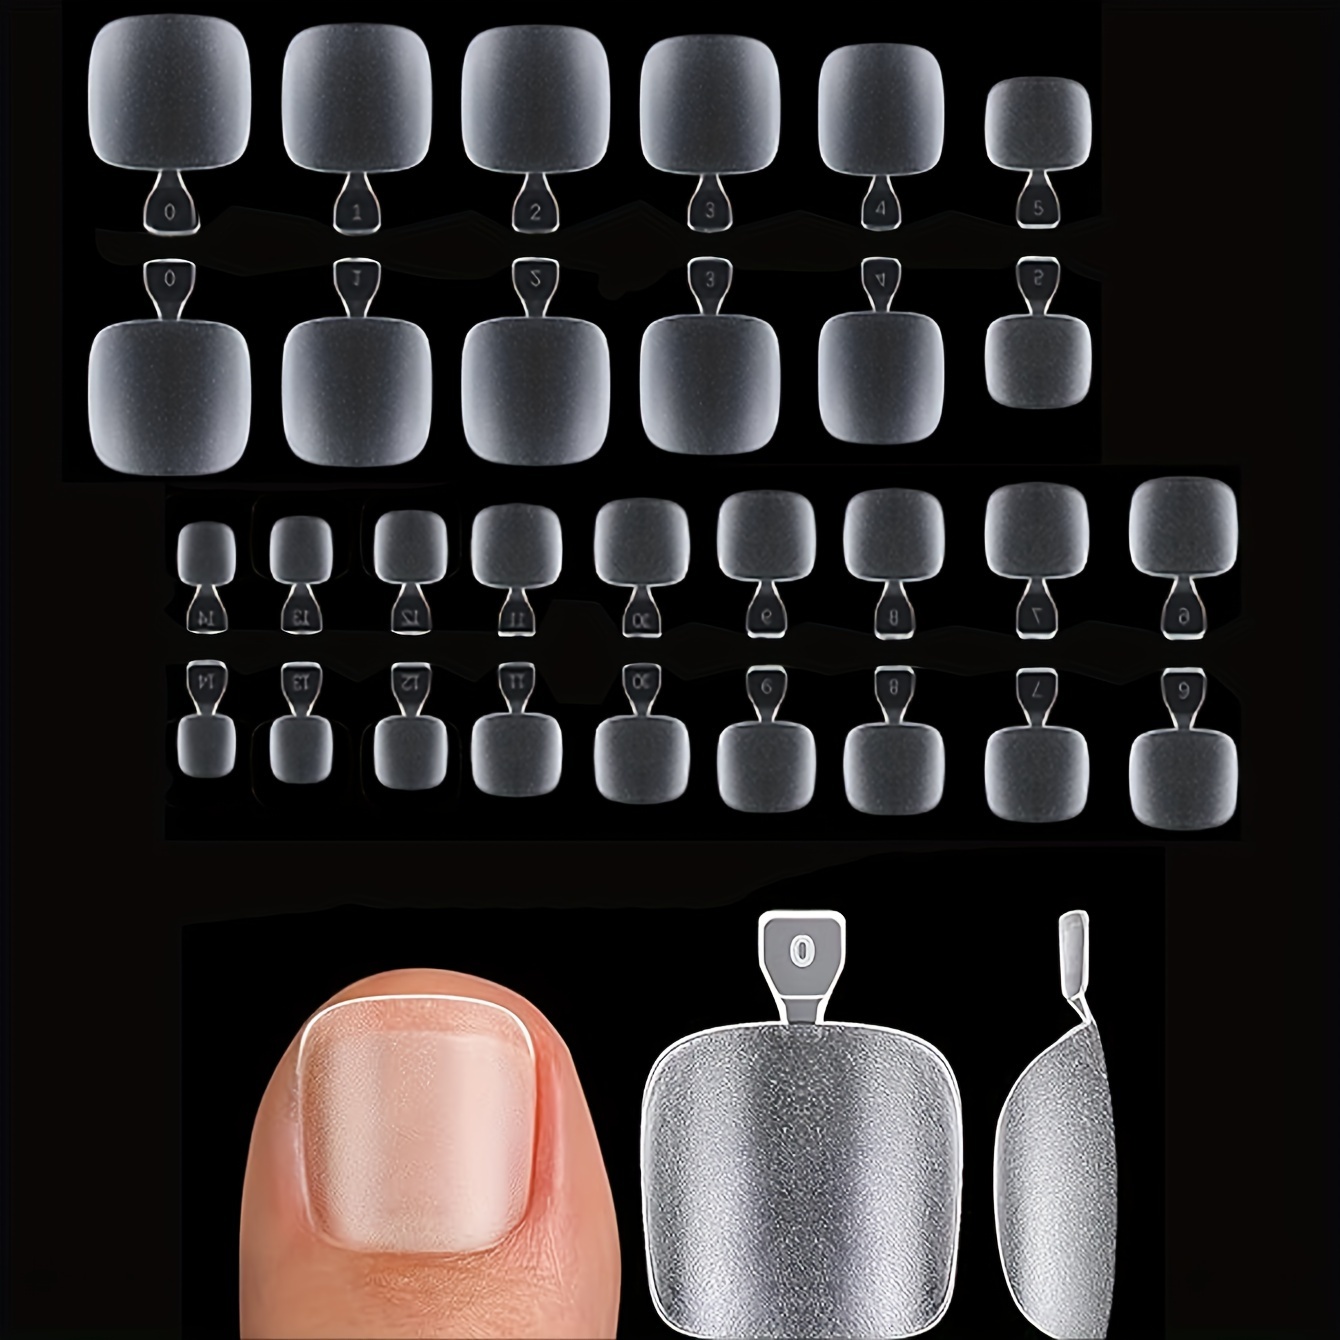 

Transparent Toe Nail Tips Set, 150pcs In 15 Sizes, No-file Matte Gel Toe Caps, Full Cover Clear Acrylic Nails For Regular & Small Toe Nail Beds, Pre-buffed Surface For Diy Home Salon Art